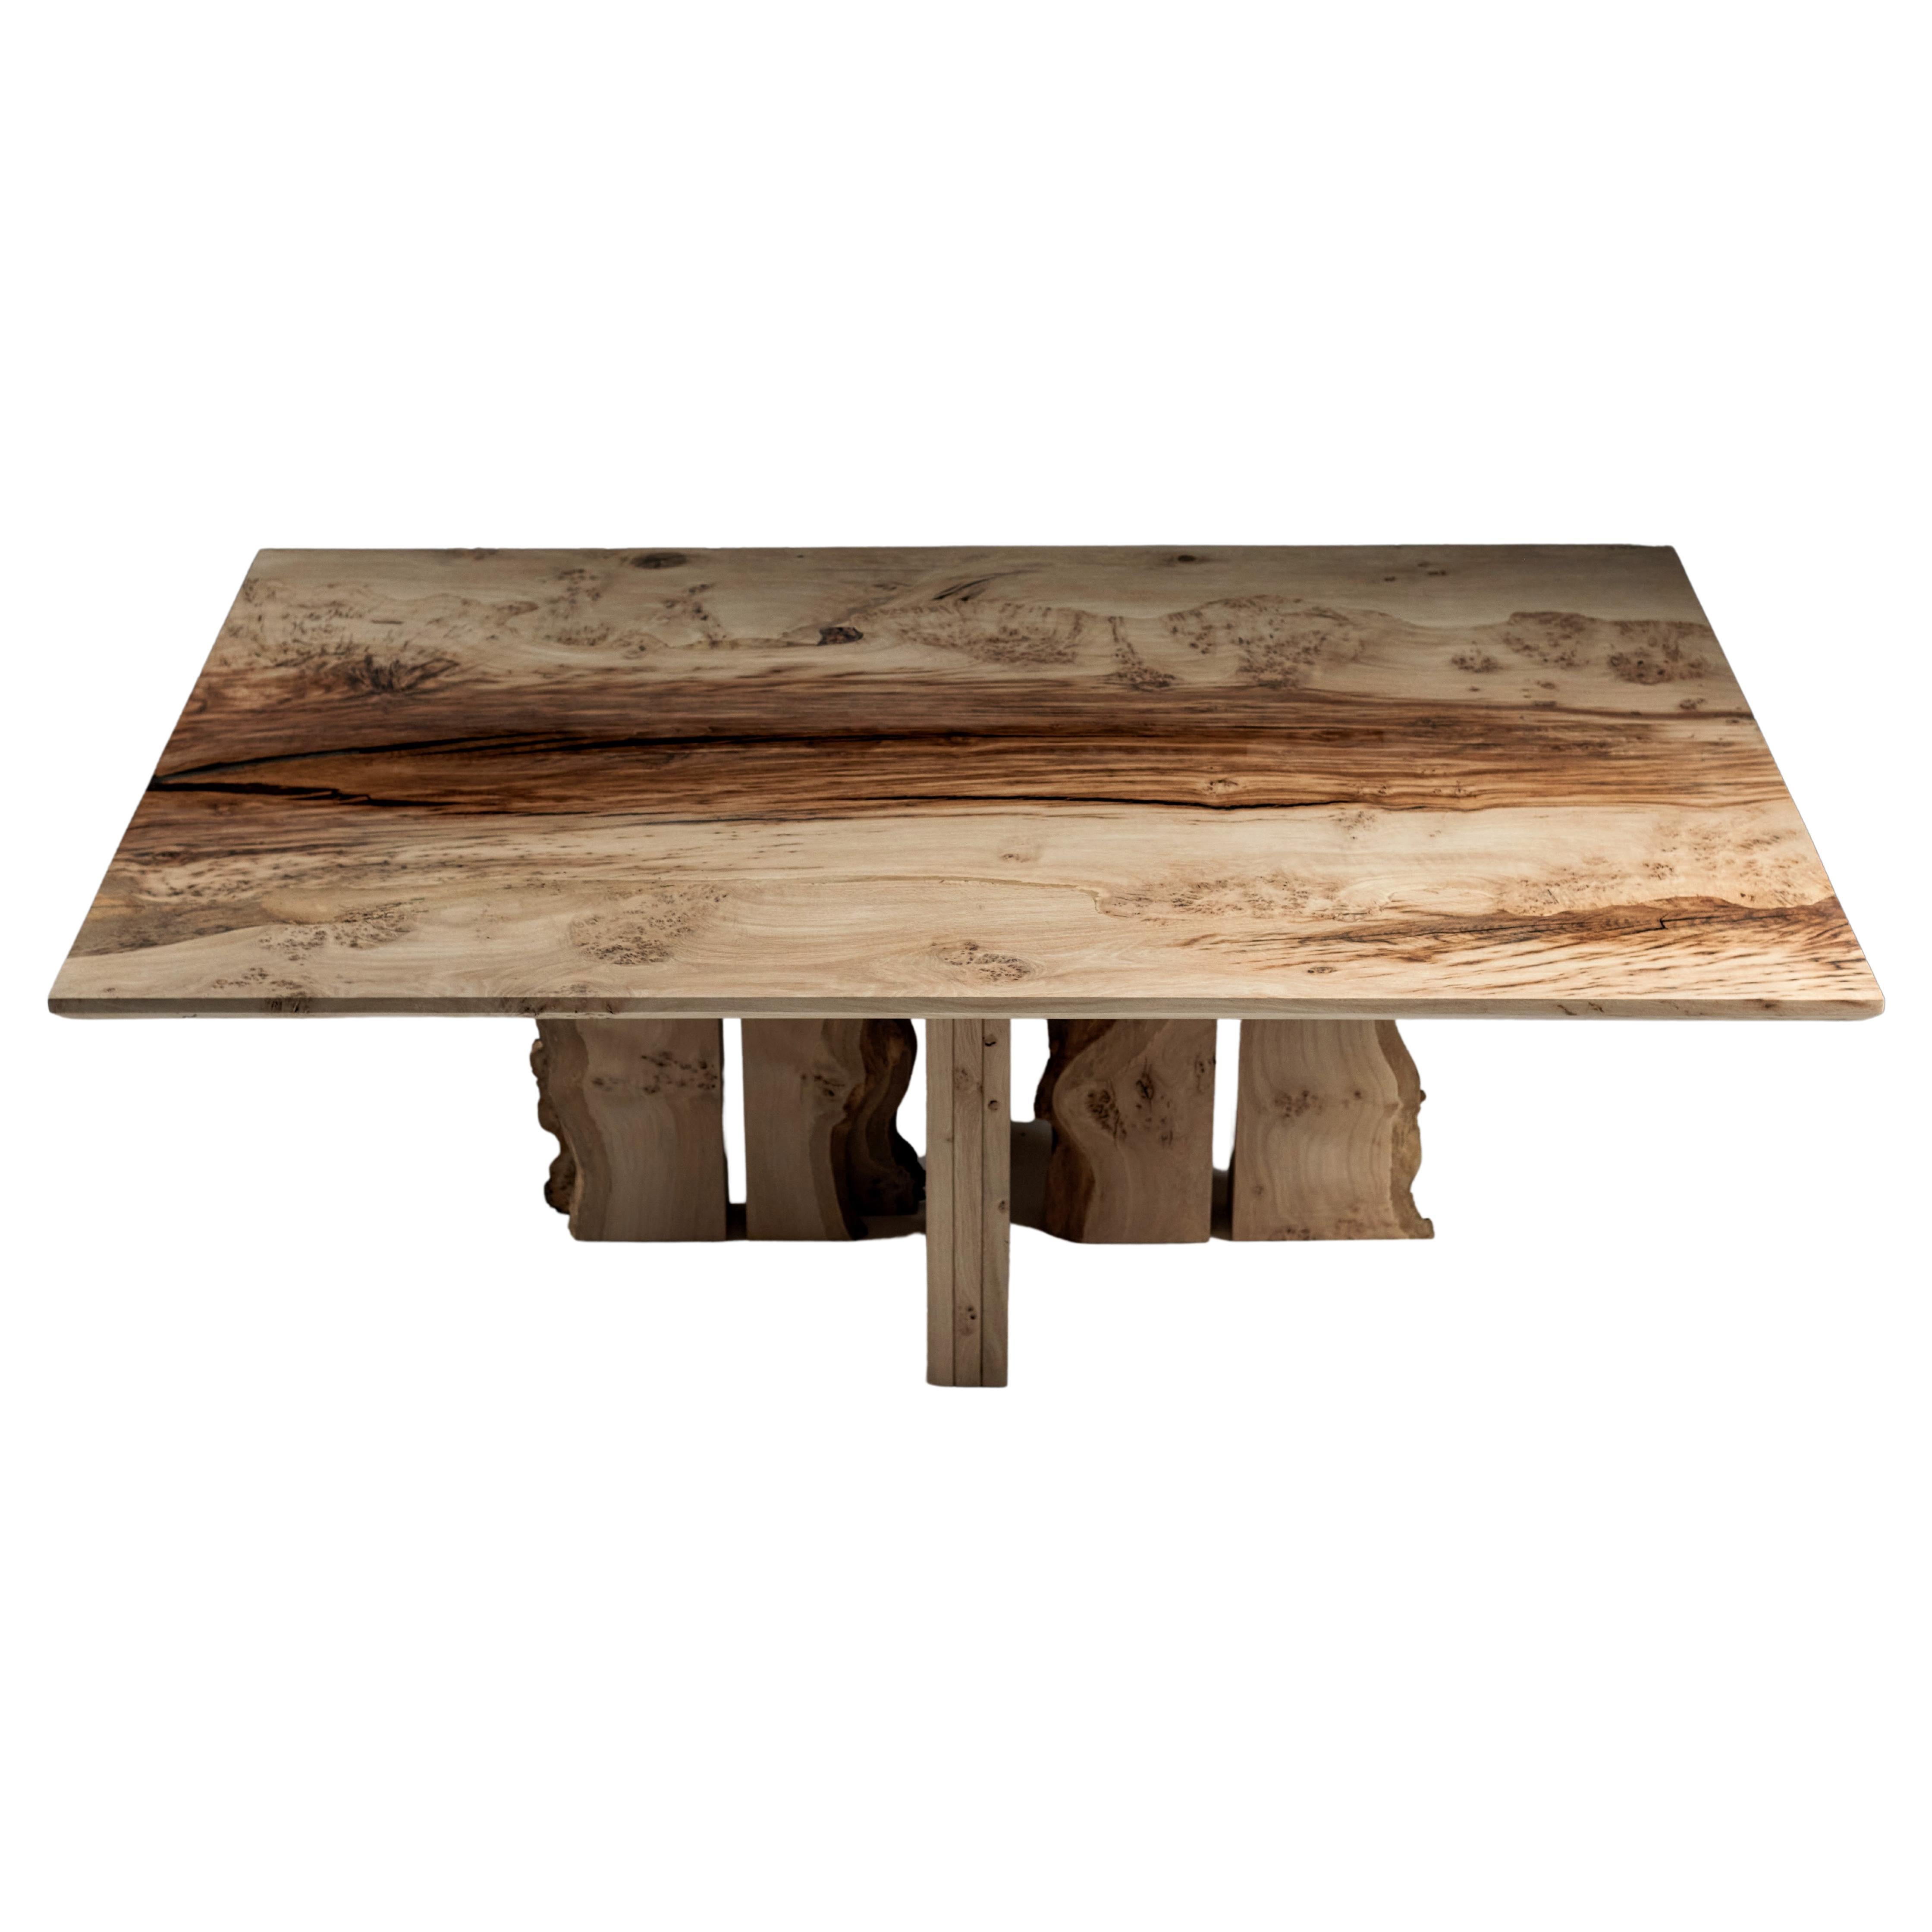 Dining Table of solid English Oak, made from two slabs of book-matched timber joined in the centre.
The Kiln dried oak has drying splits that feature a clear resin with a tint of ebony.
The central leg arrangement allows for seating in any position